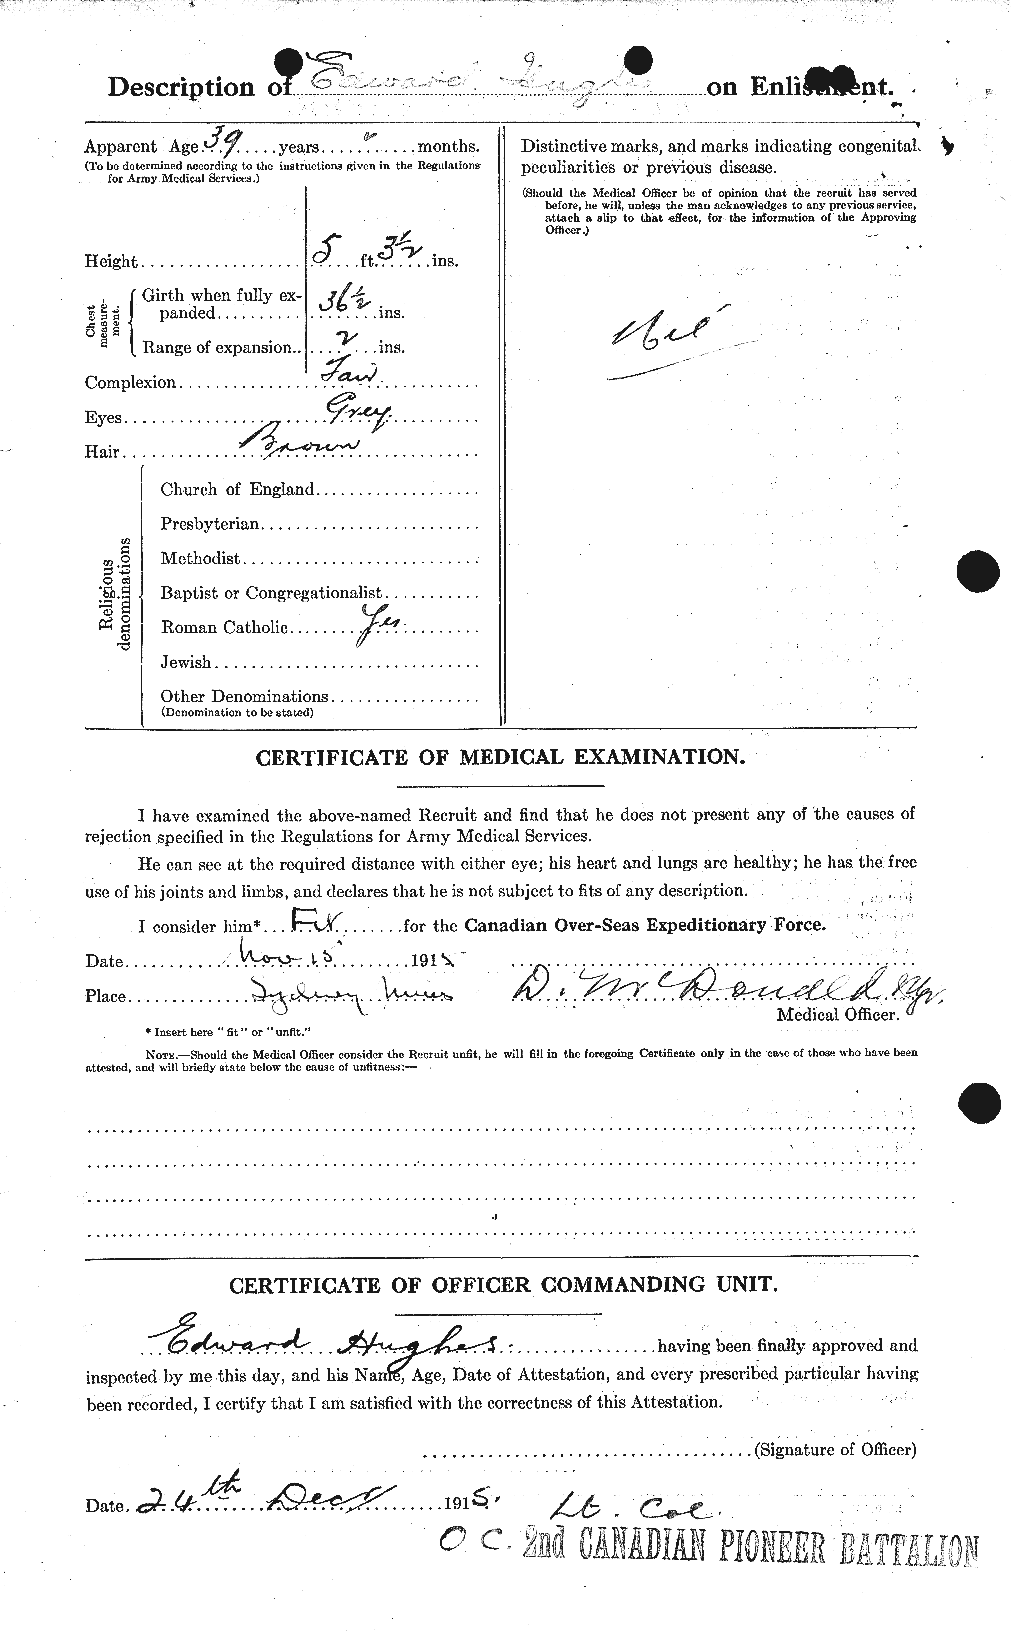 Personnel Records of the First World War - CEF 402669b